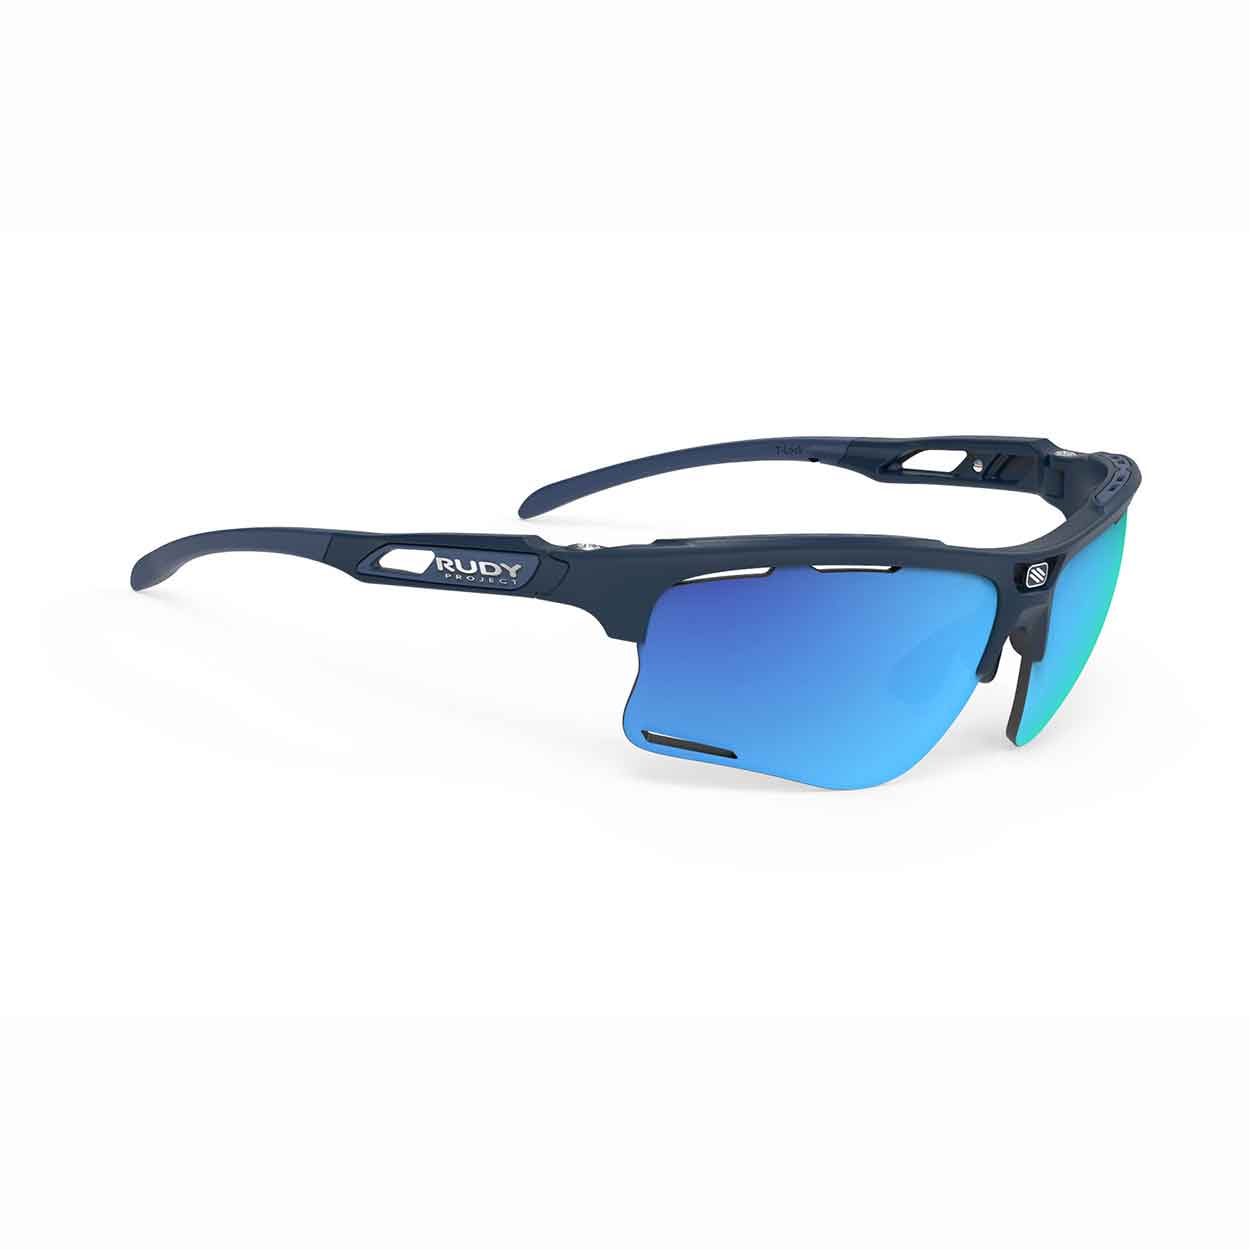 Rudy Project Keyblade Sportbrille